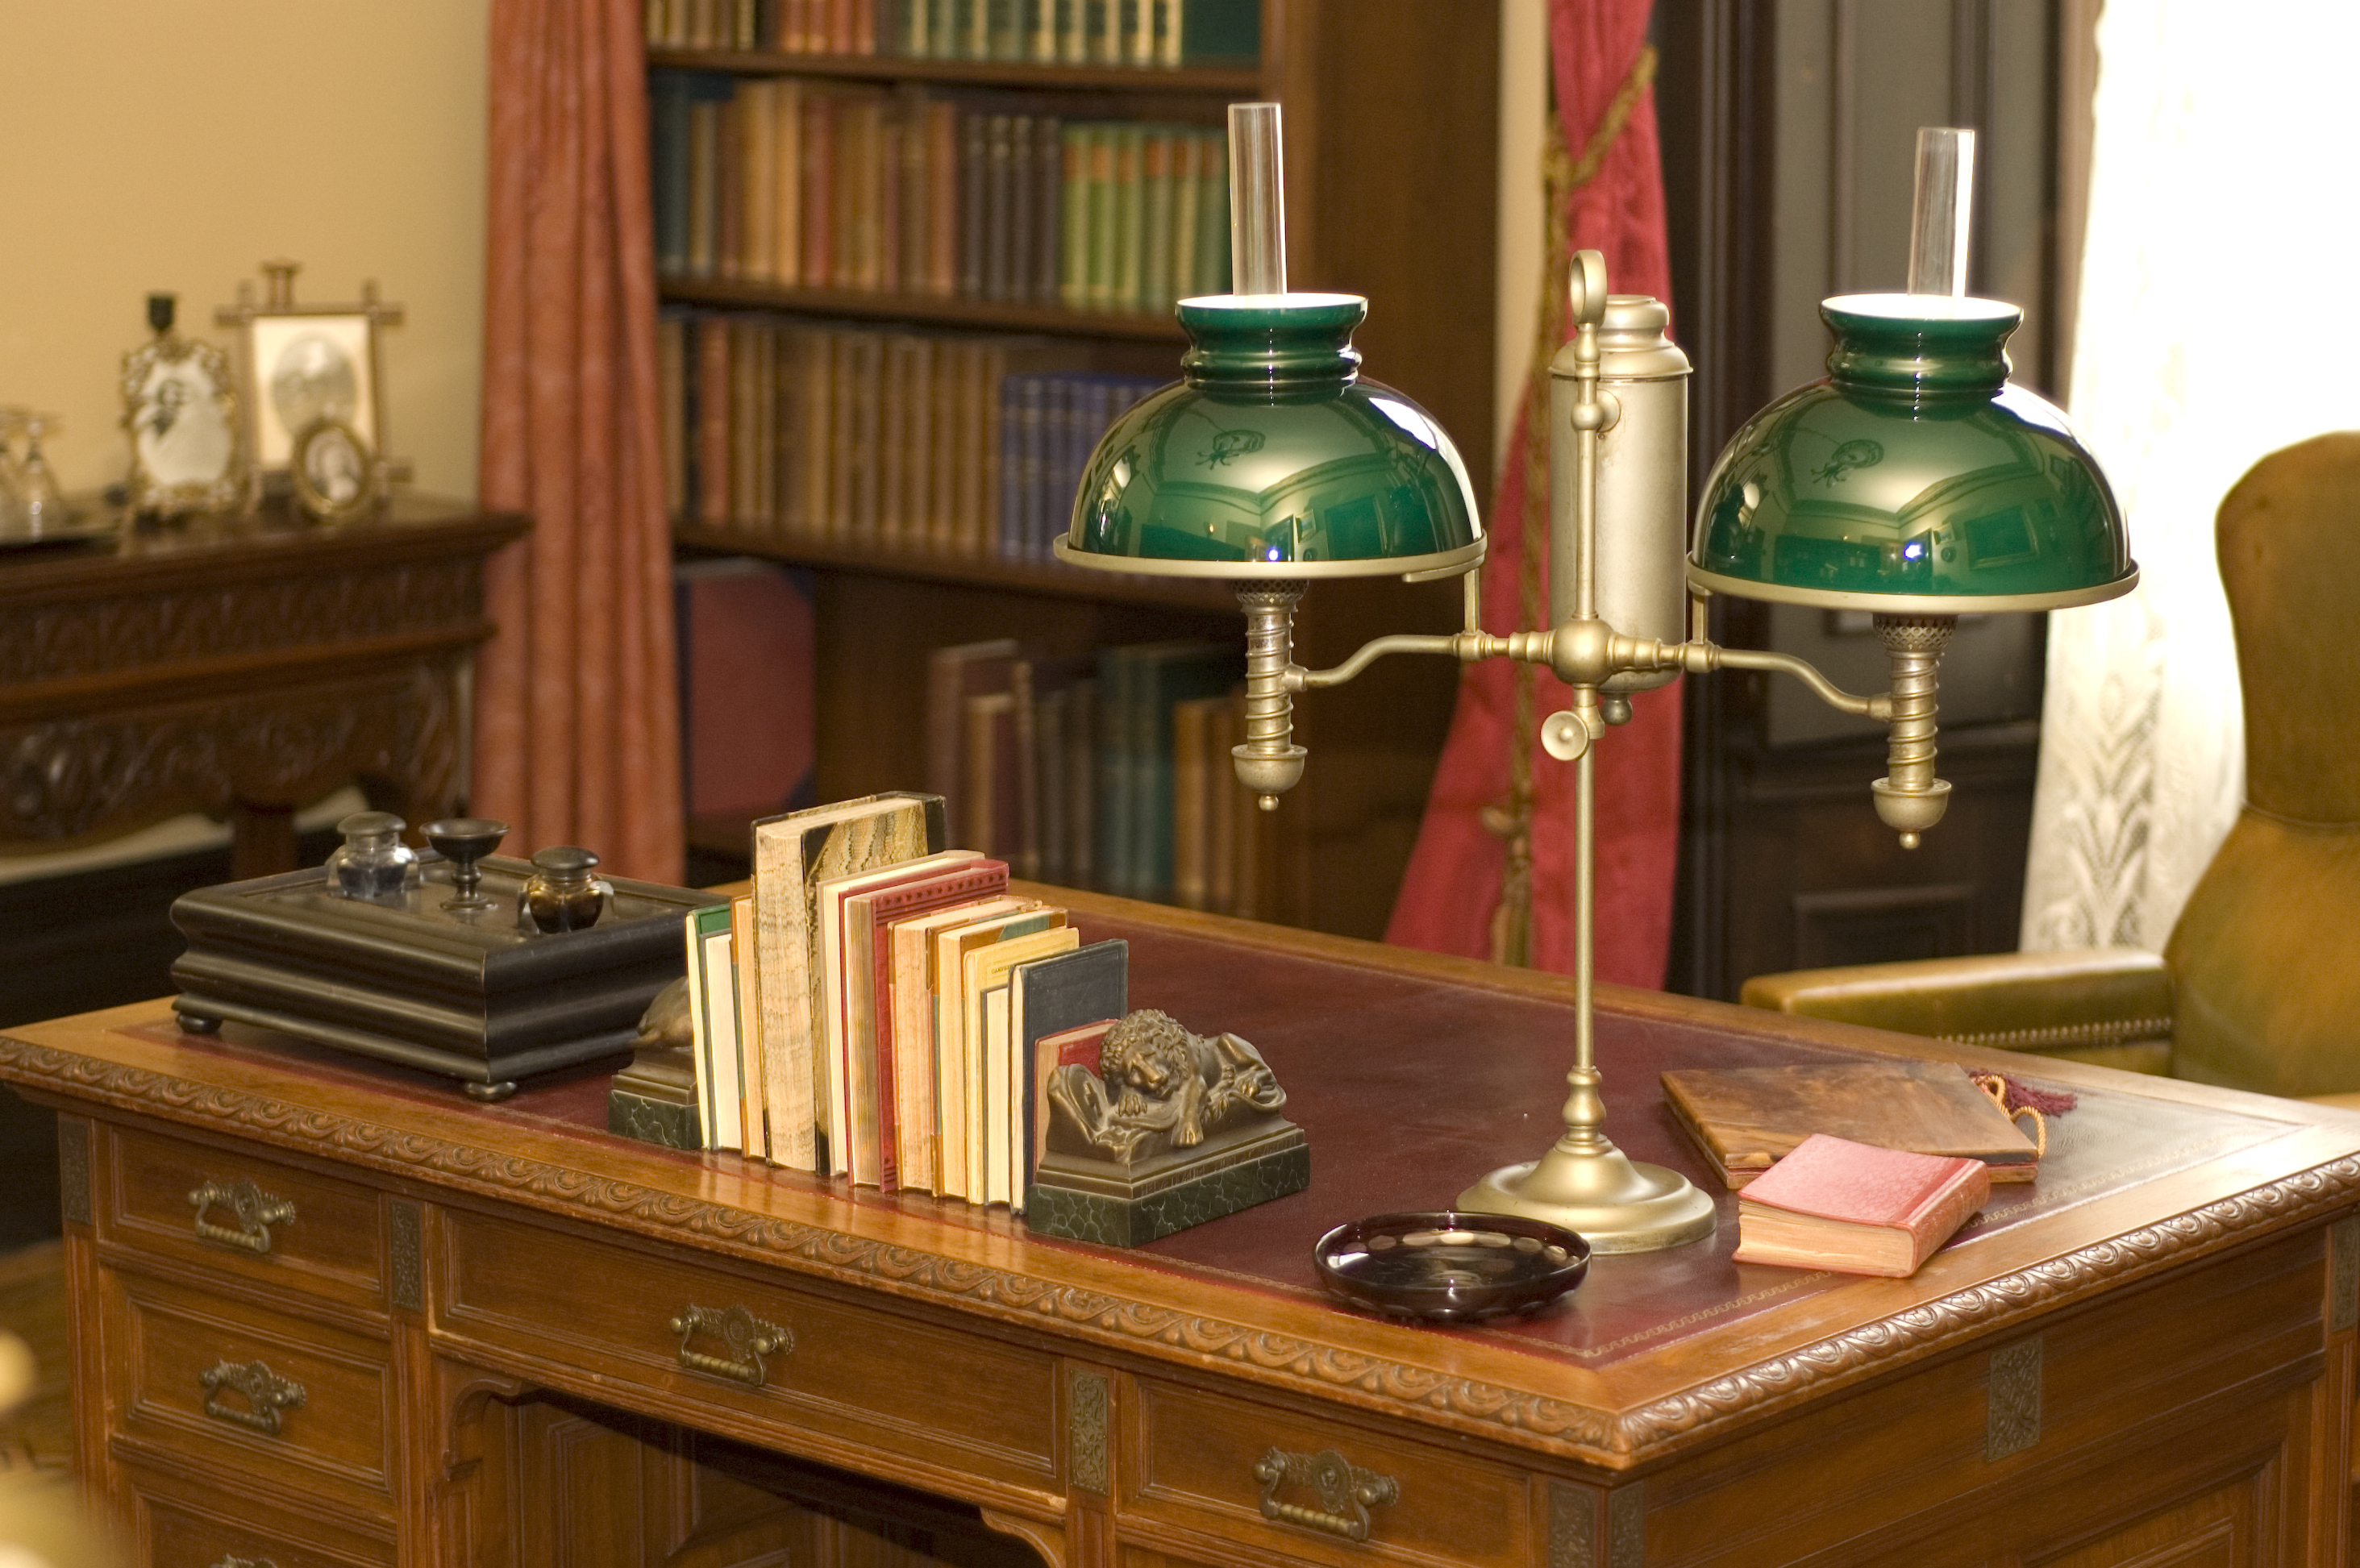 A classic oil lamp and books placed on an antique office desk | Source: Shutterstock